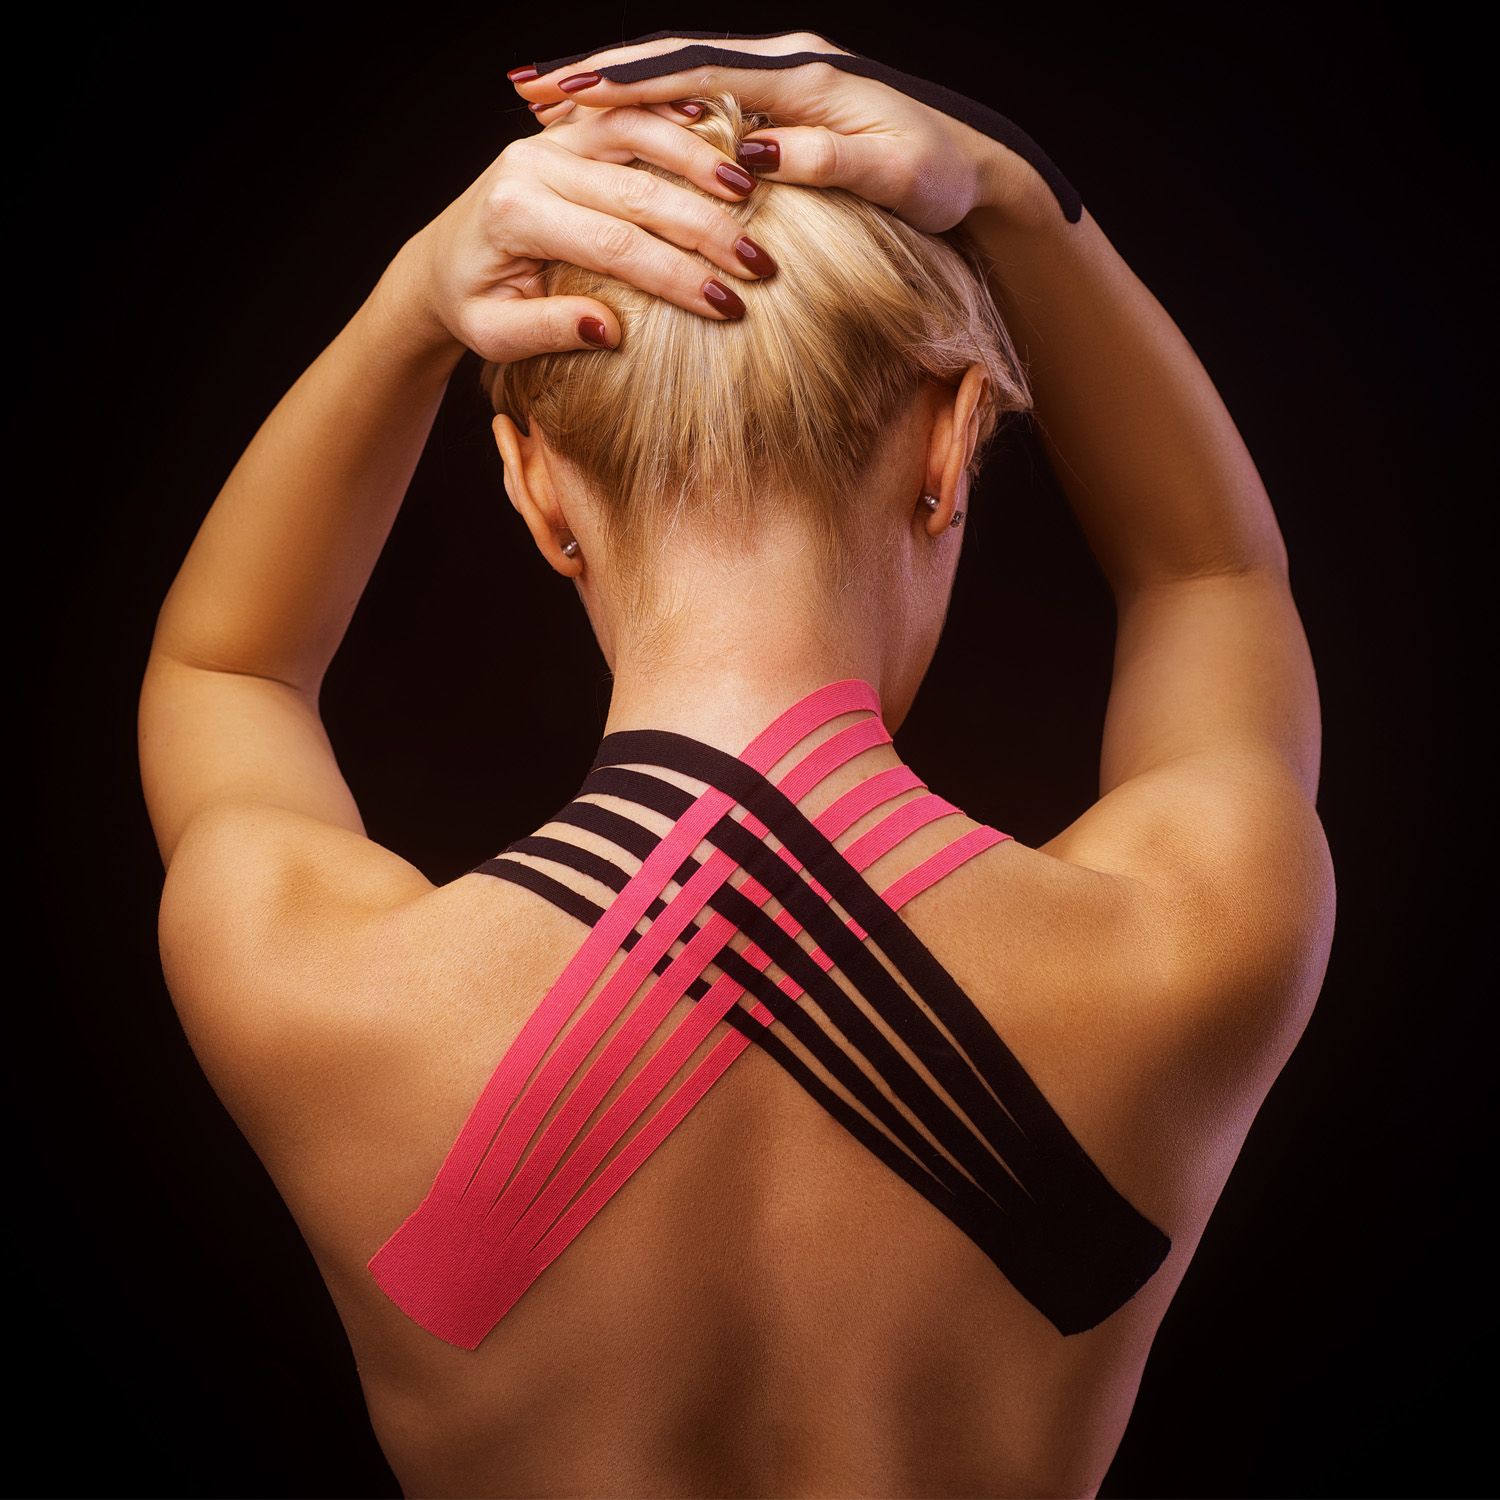 kinesiology tape 4 rolls plus 1 roll for free mood photo